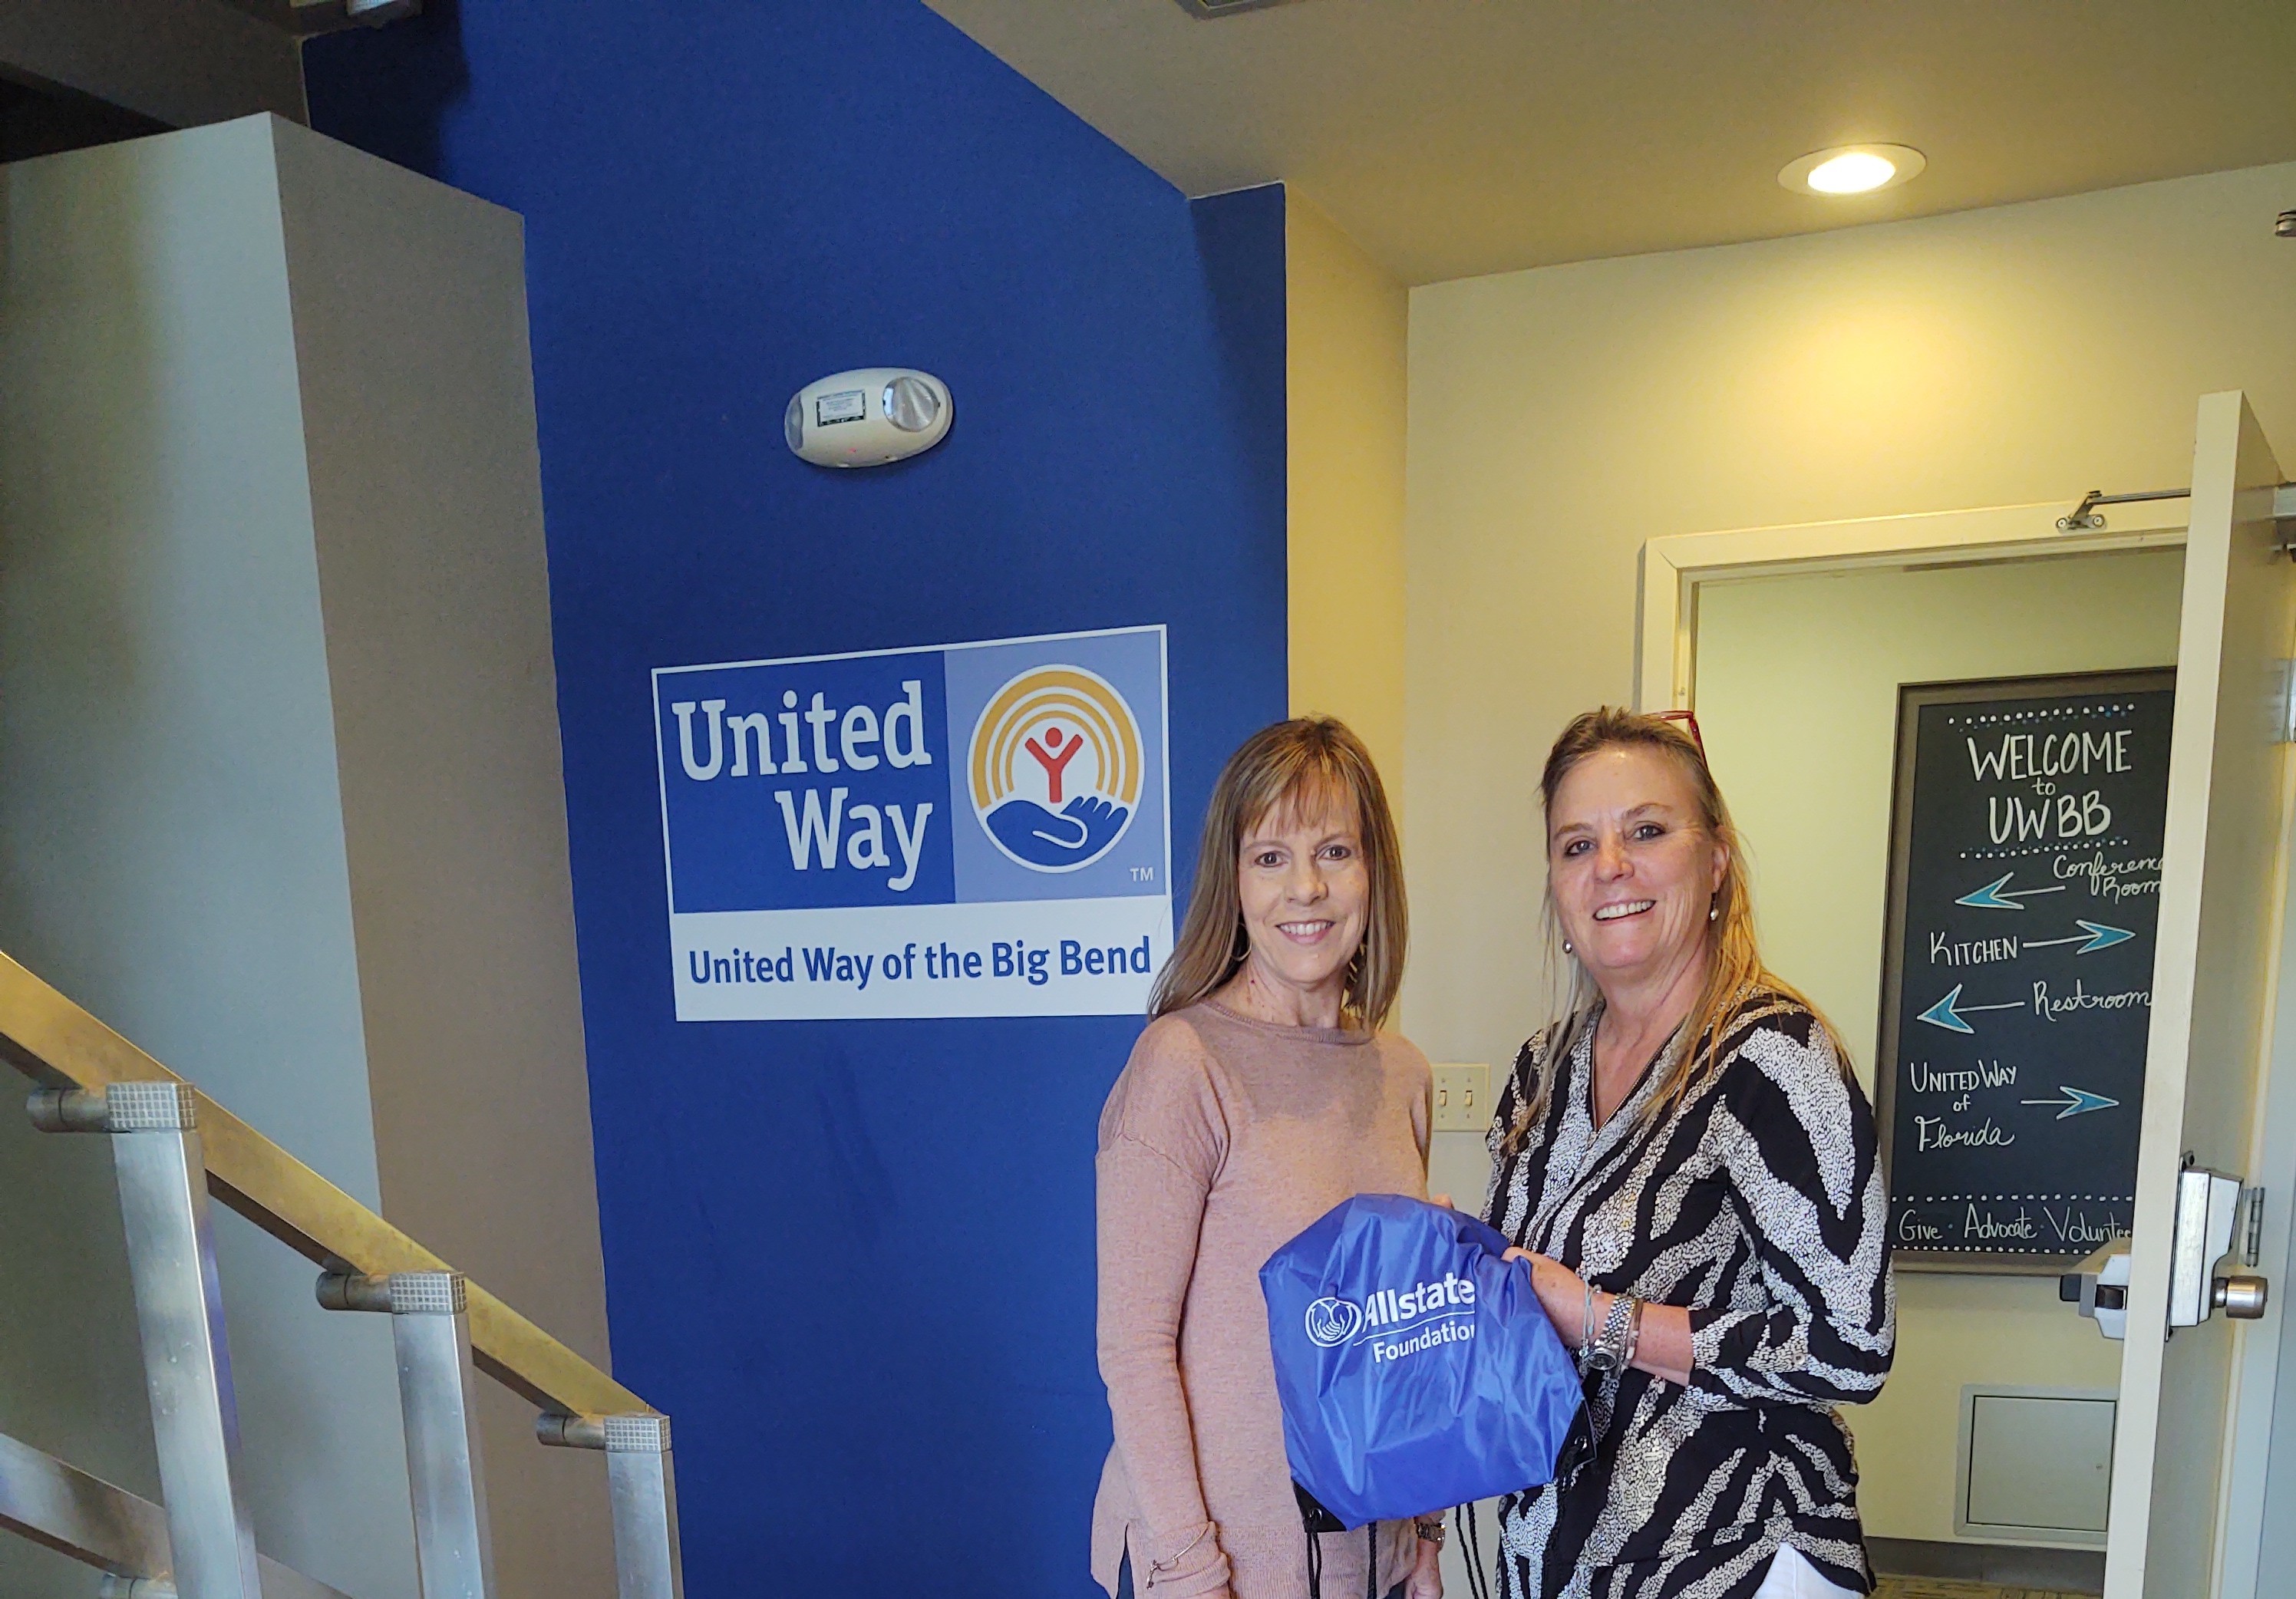 Our Allstate agency was proud to assist those affected by Hurricane Ian. We donated supplies and disaster kits to the United Way Tallahassee.